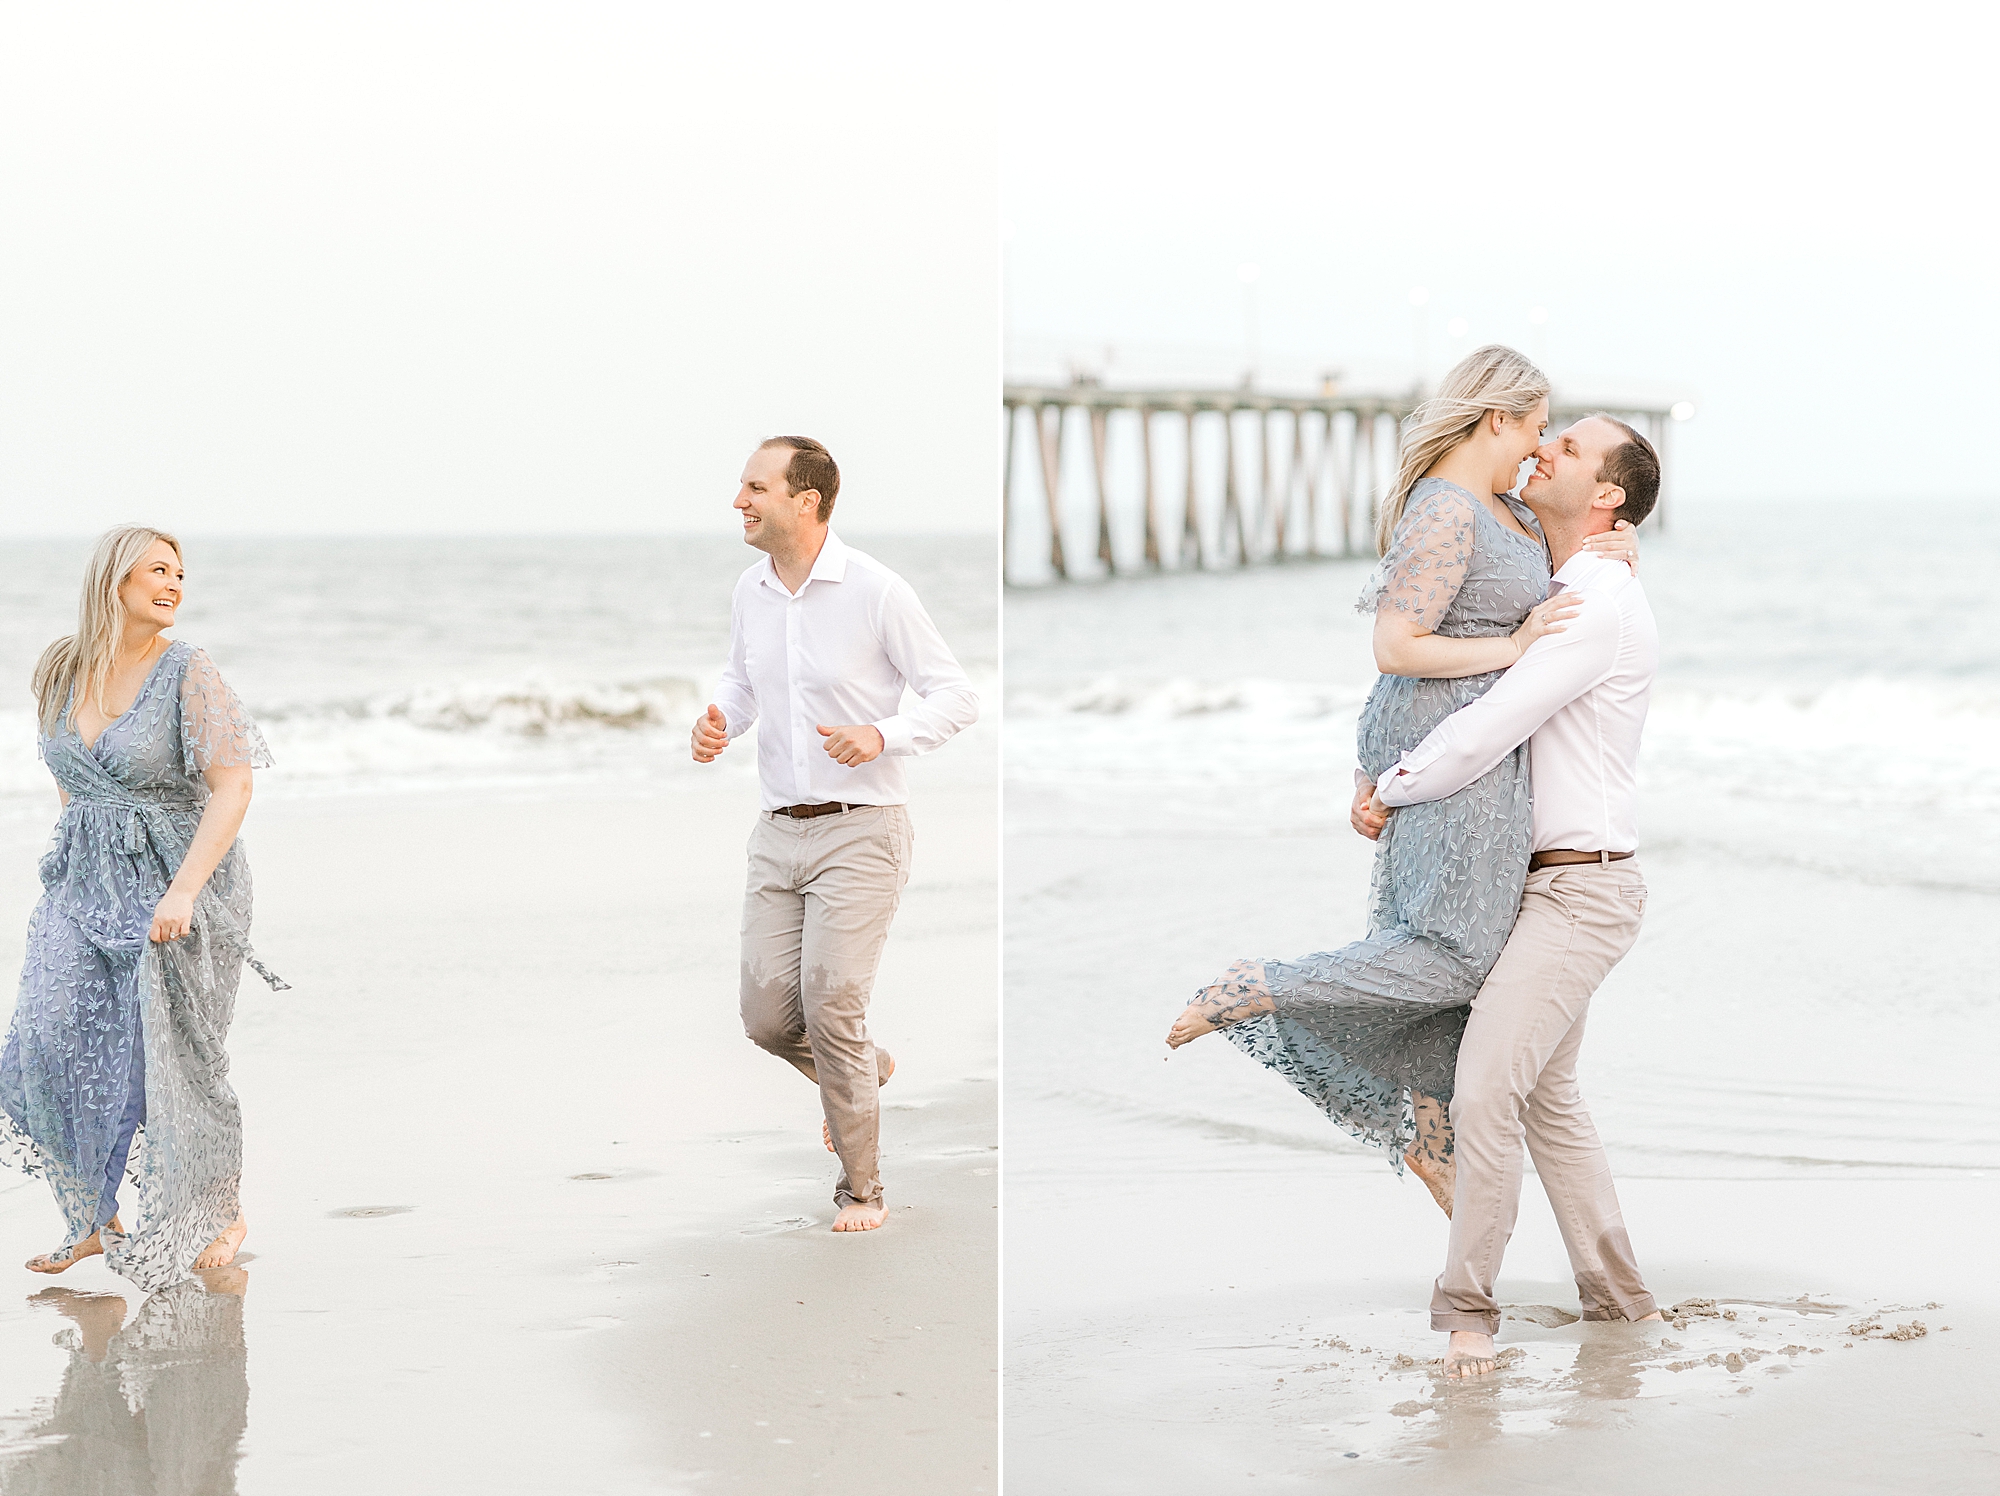 couple runs on beach and man picks up fiancee during Ventnor Beach engagement session